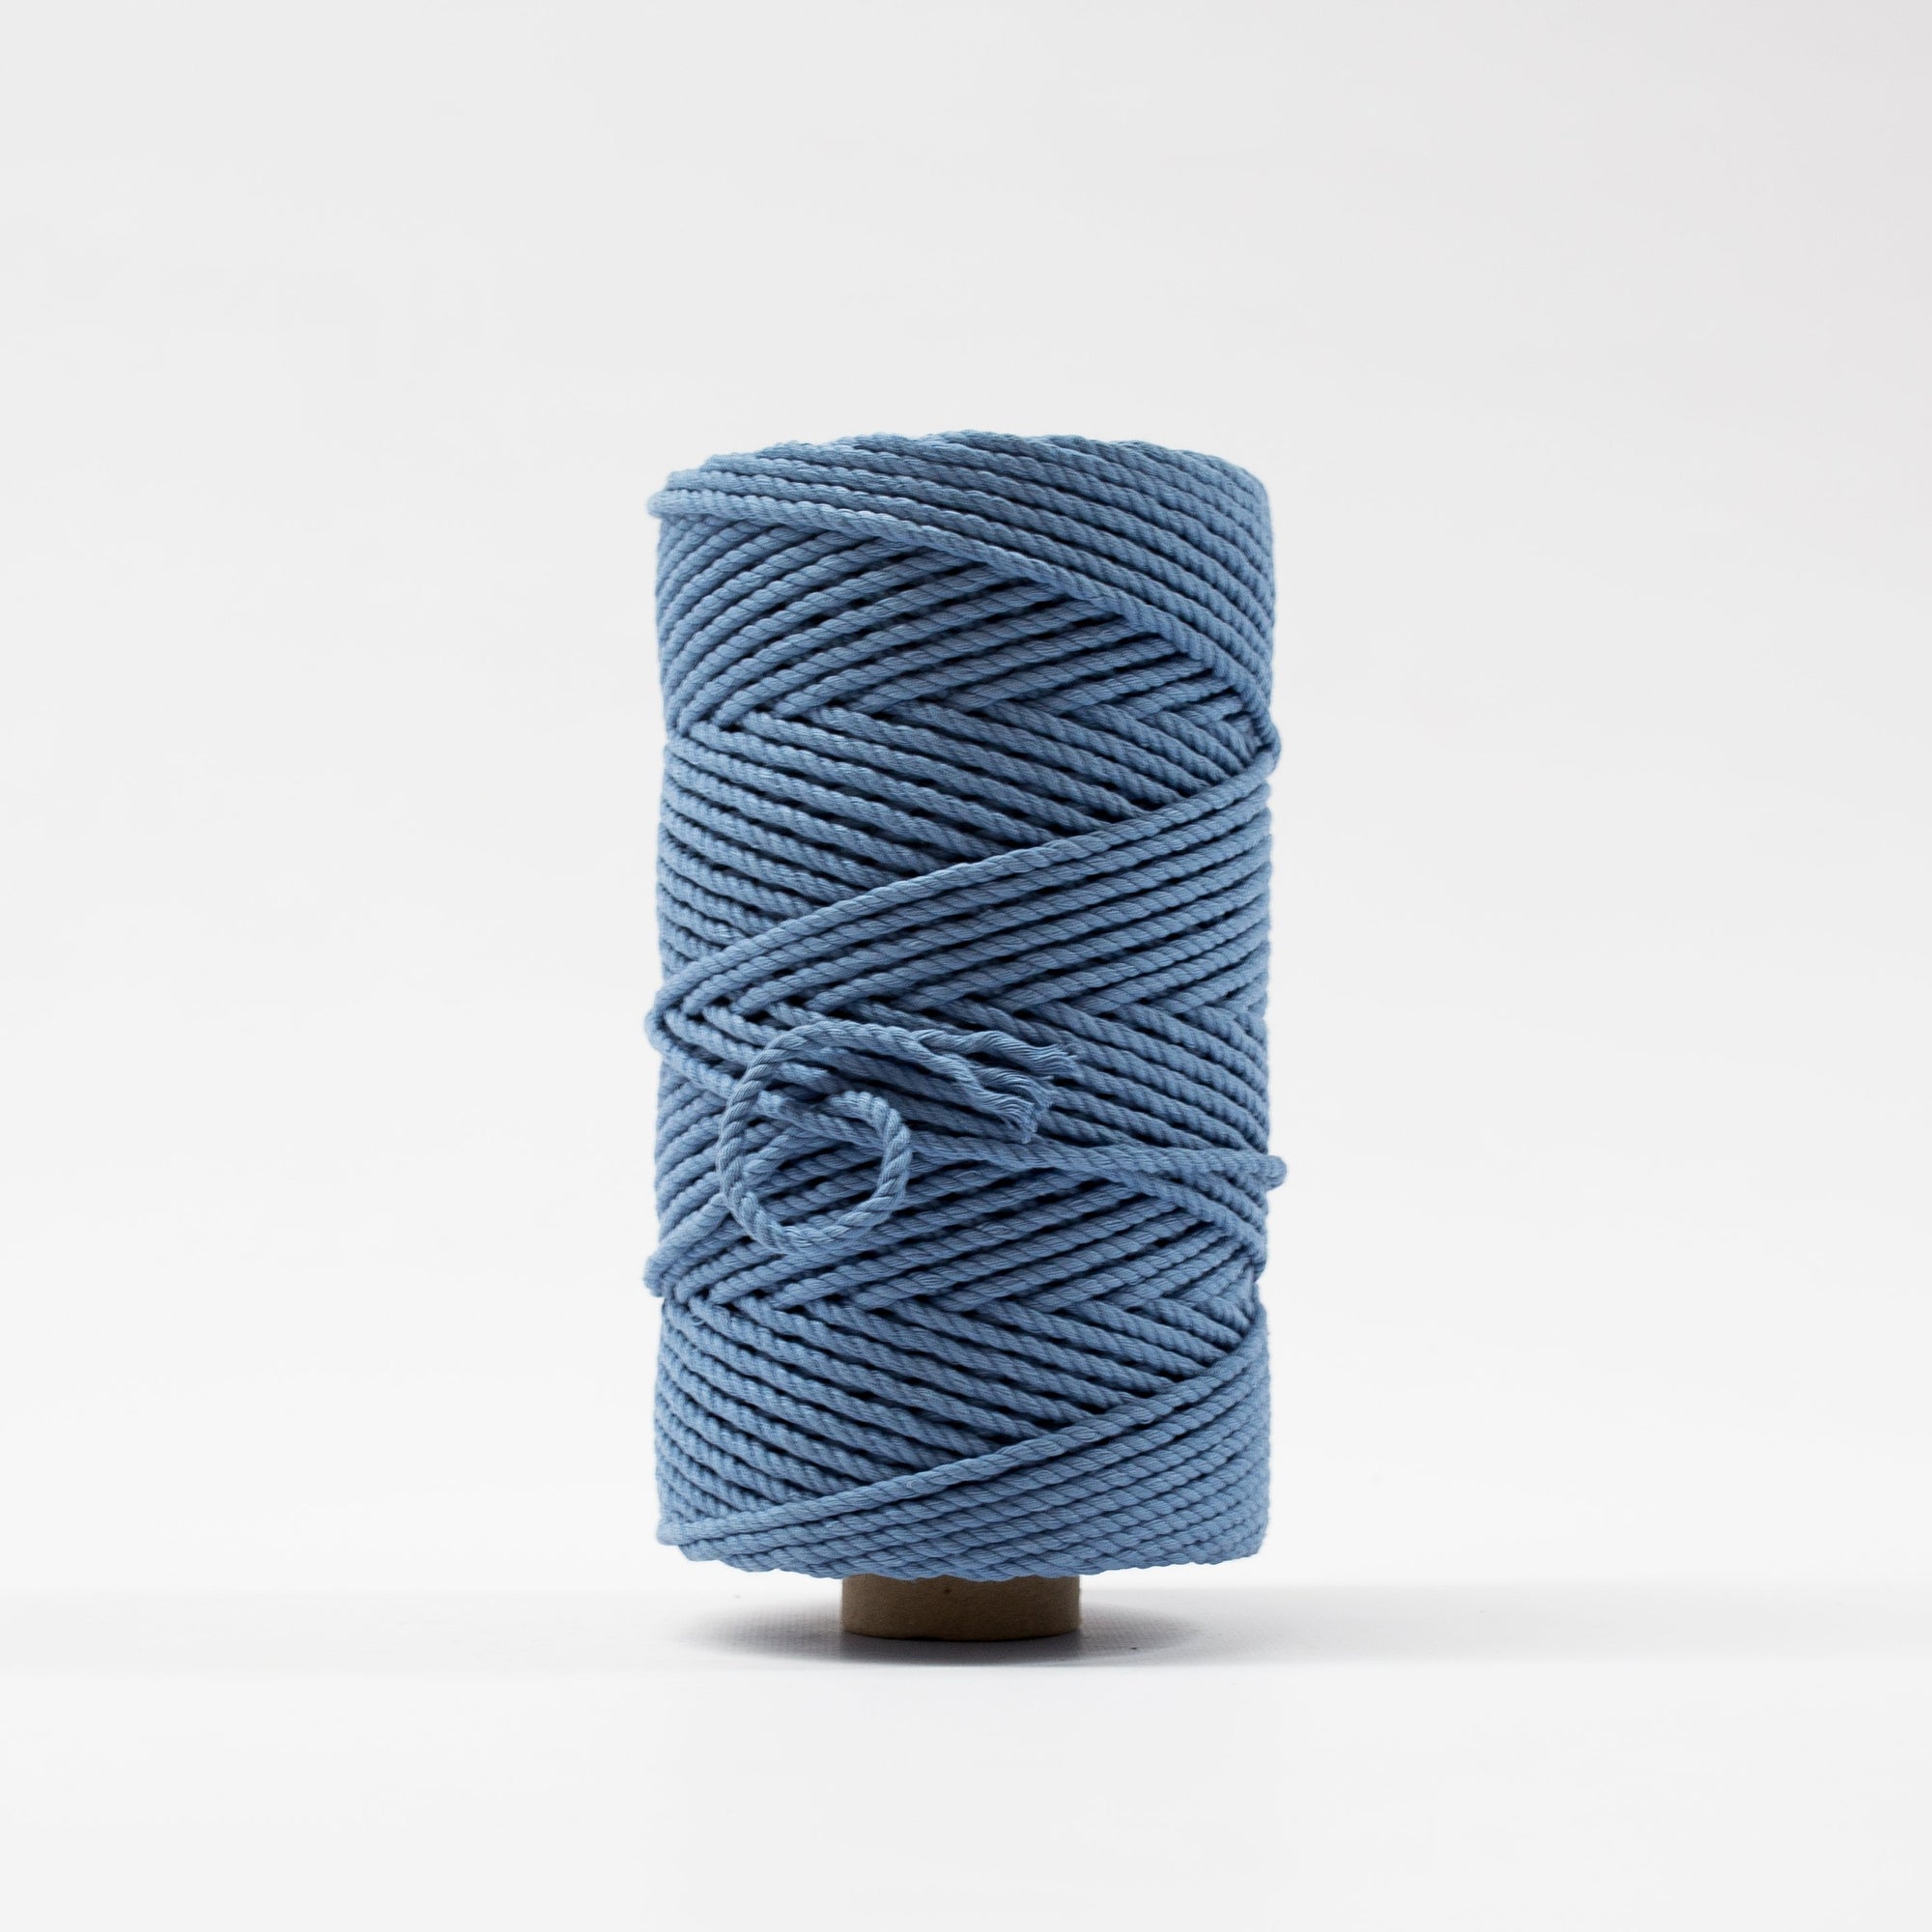 Mary Maker Studio Luxe Colour Cotton 4mm 1KG Recycled Luxe Macrame Rope // Parisian Blue macrame cotton macrame rope macrame workshop macrame patterns macrame